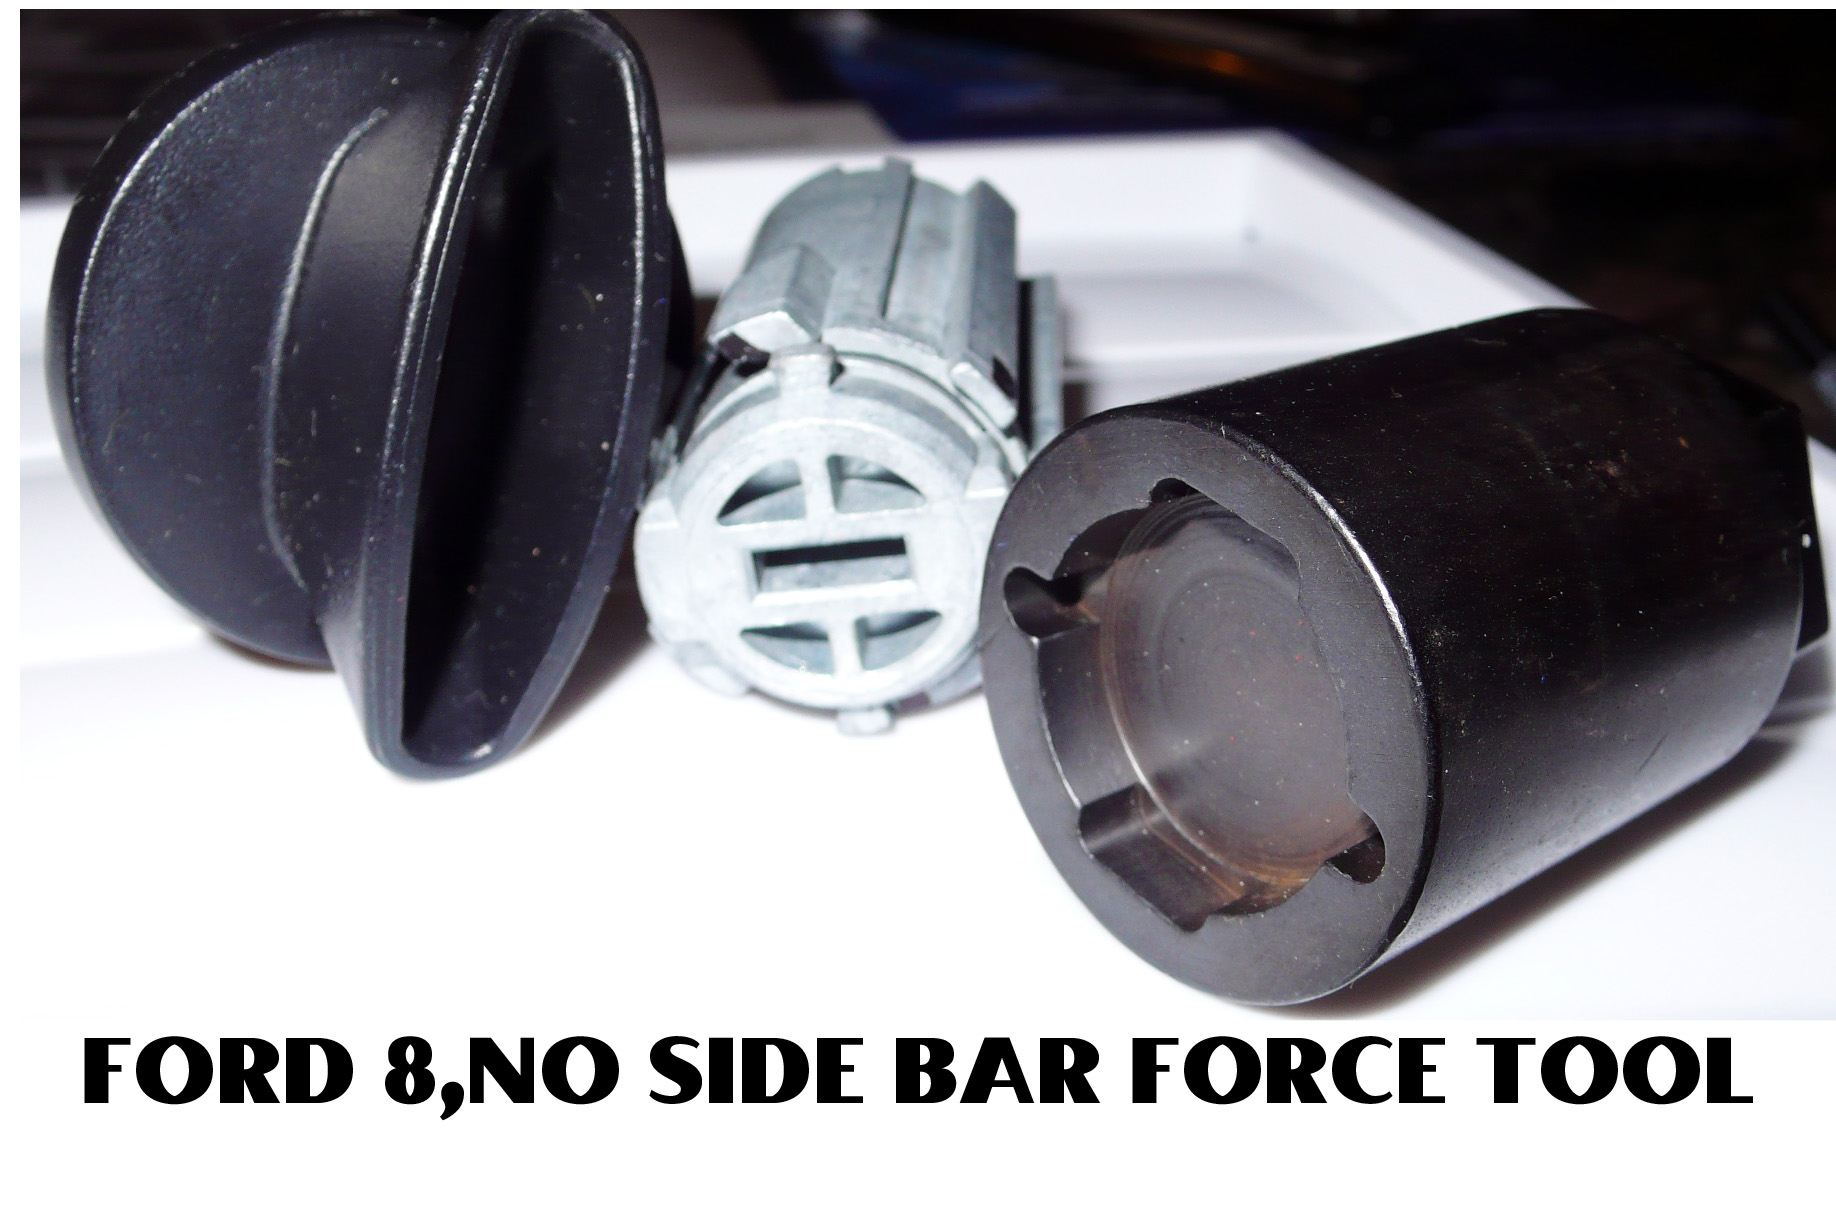 FORD 8 NO SIDE BAR FORCE TOOL